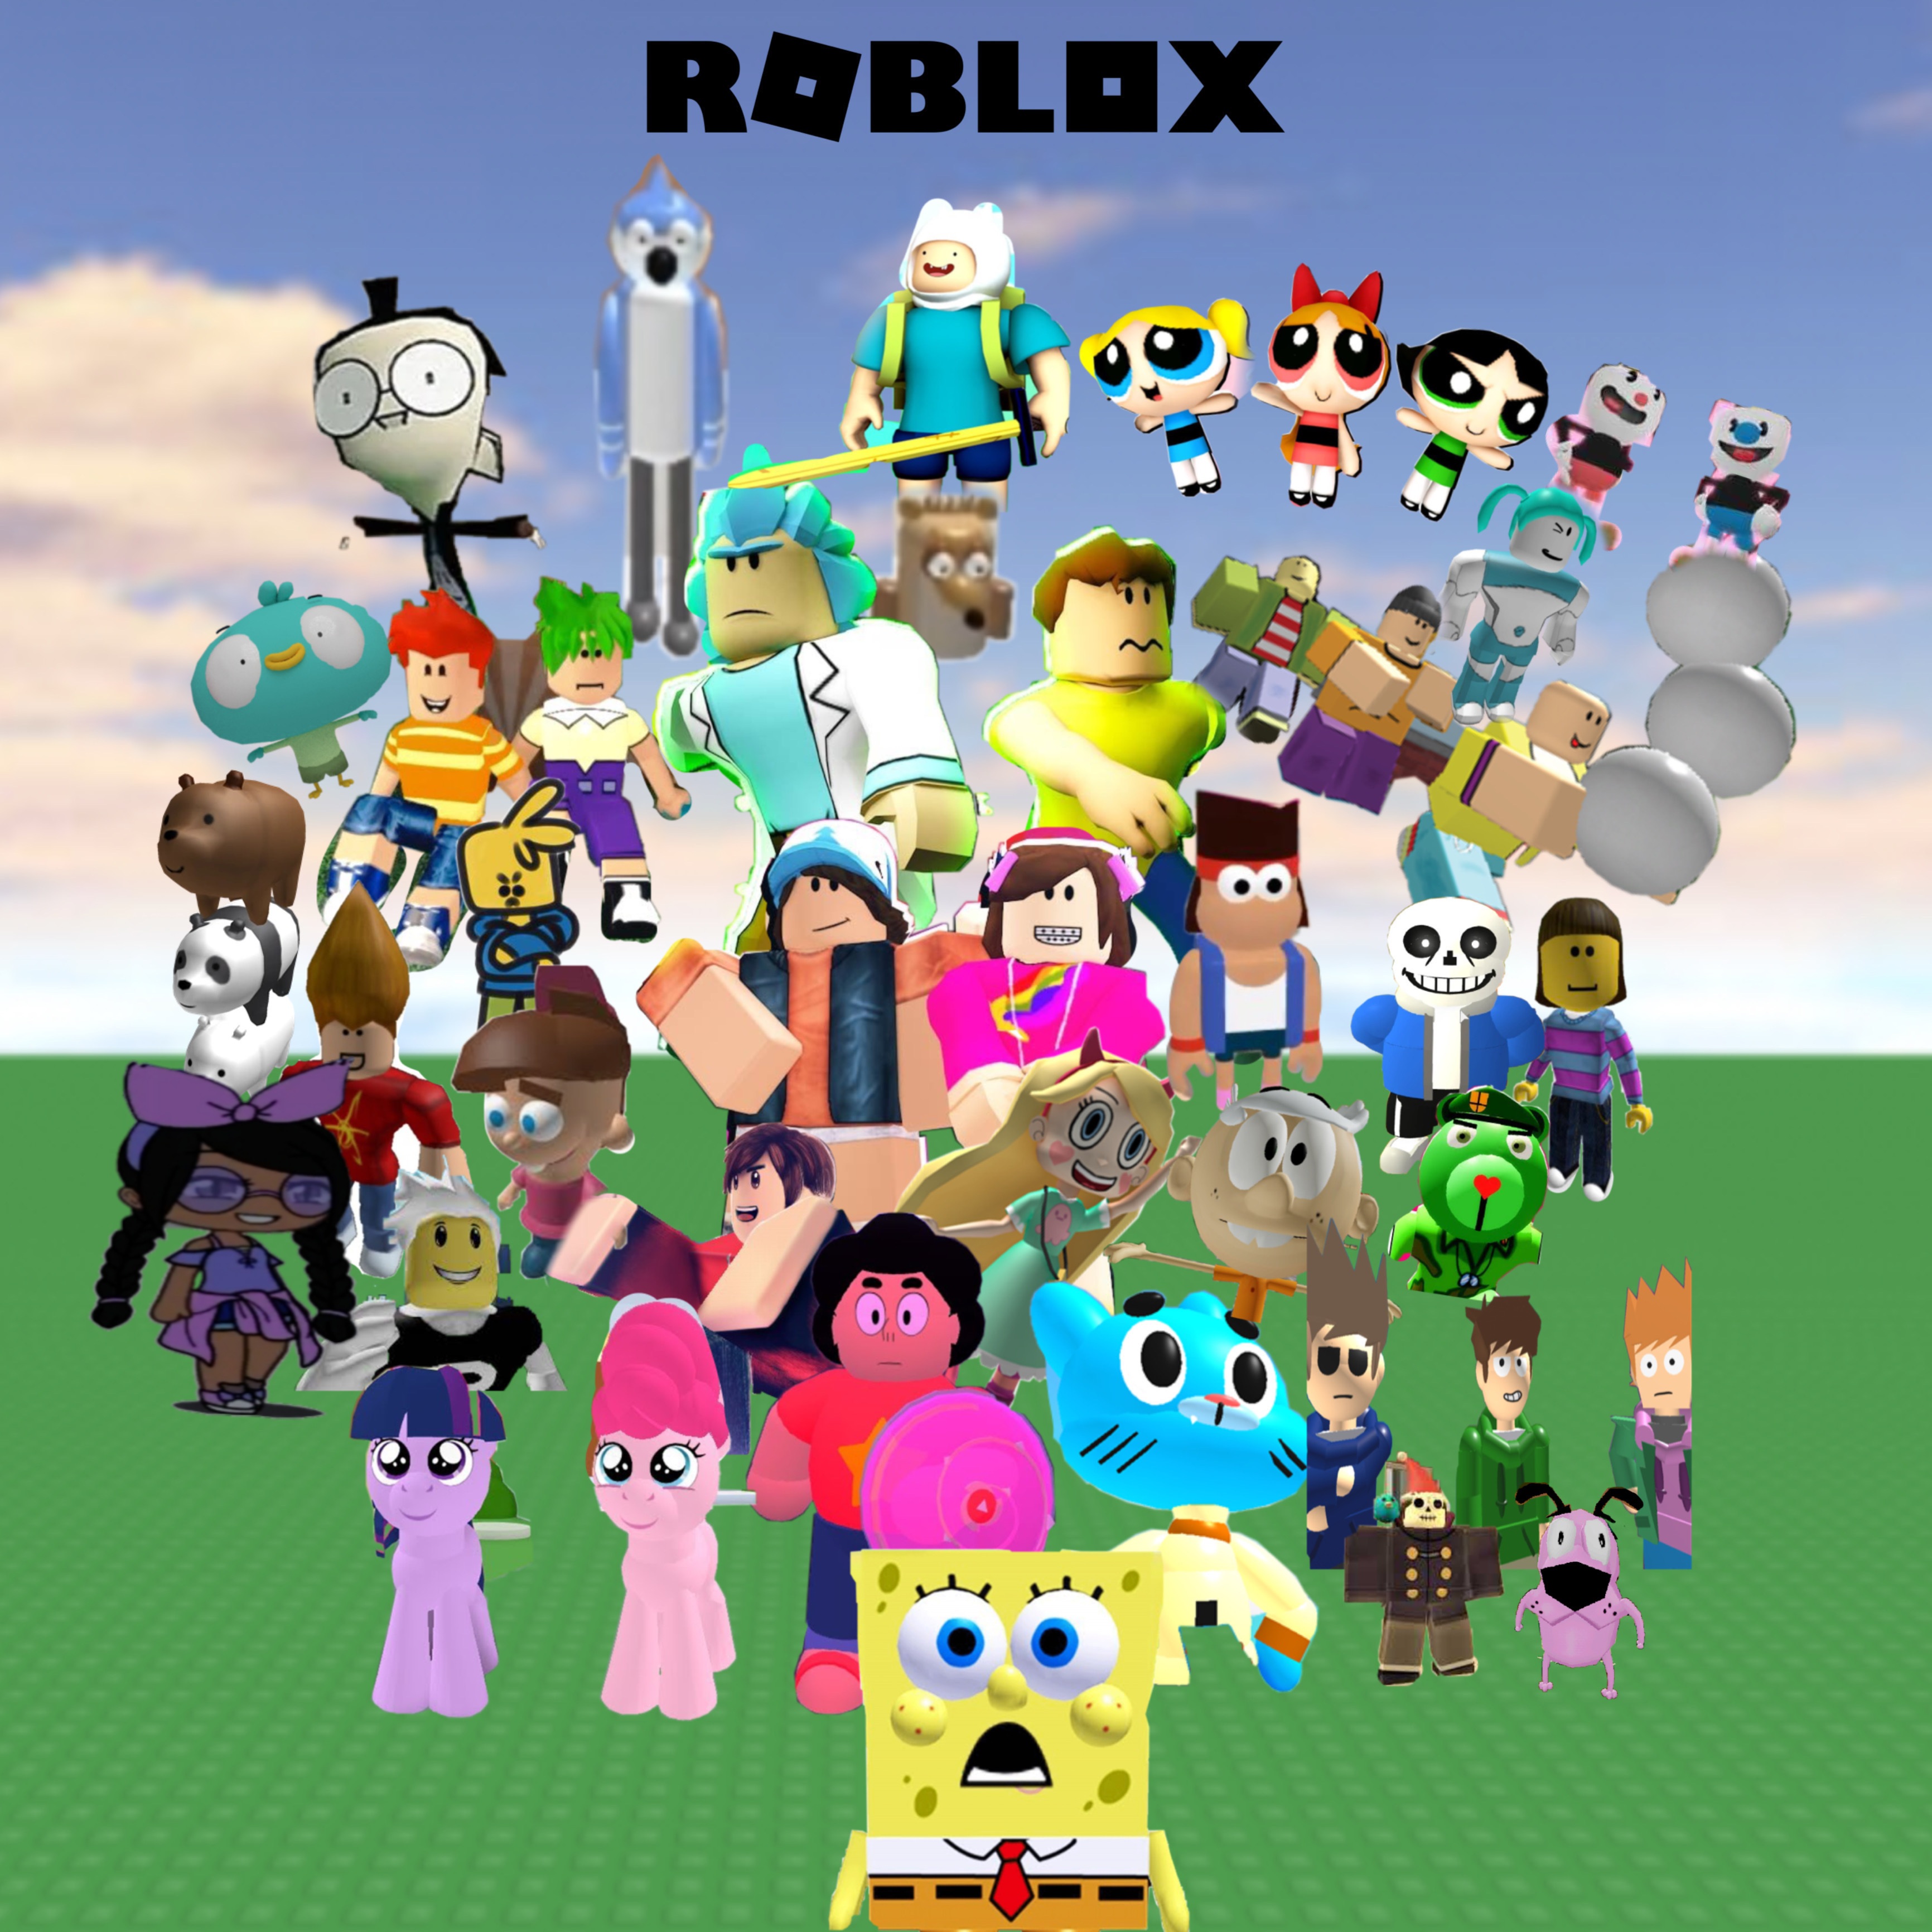 AVATAR - GianBlox ( Roblox) by VicTycoon on DeviantArt